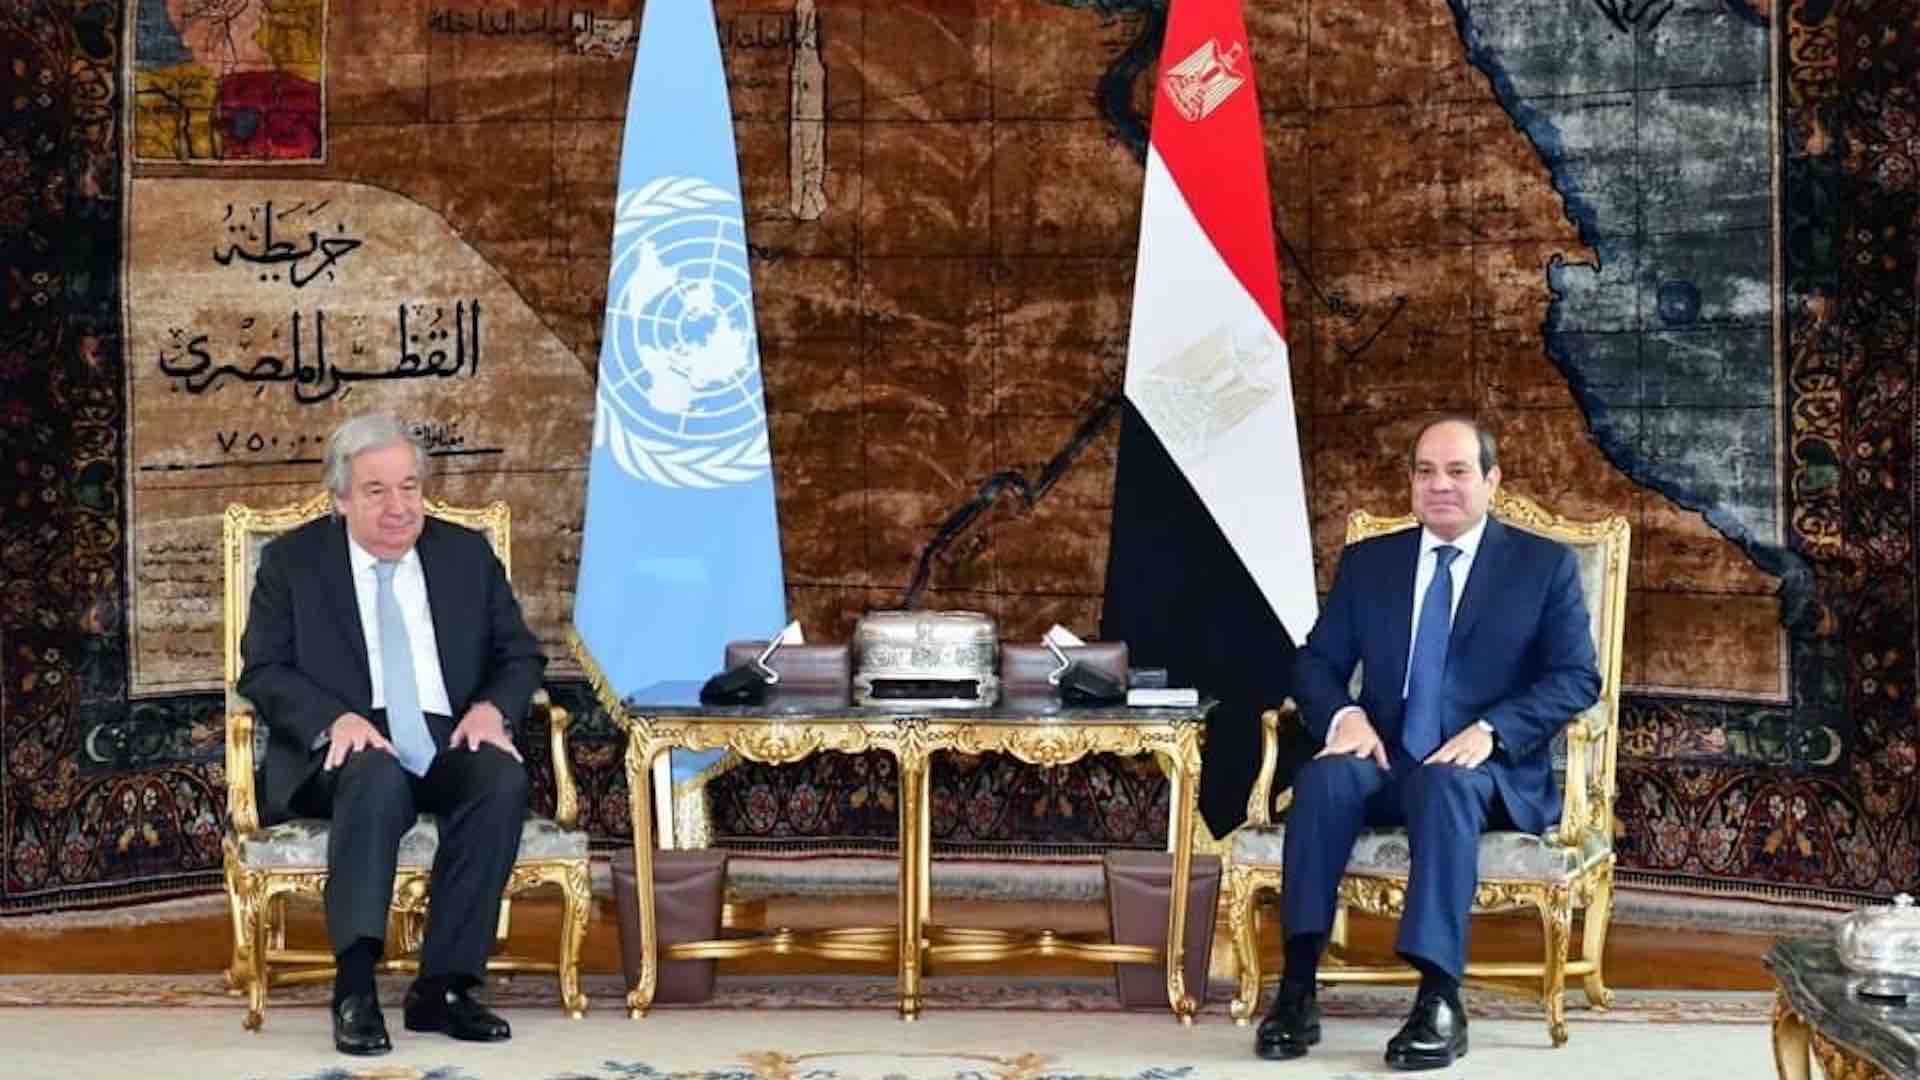 Egyptian president and UN chief confer on Gaza crisis solutions